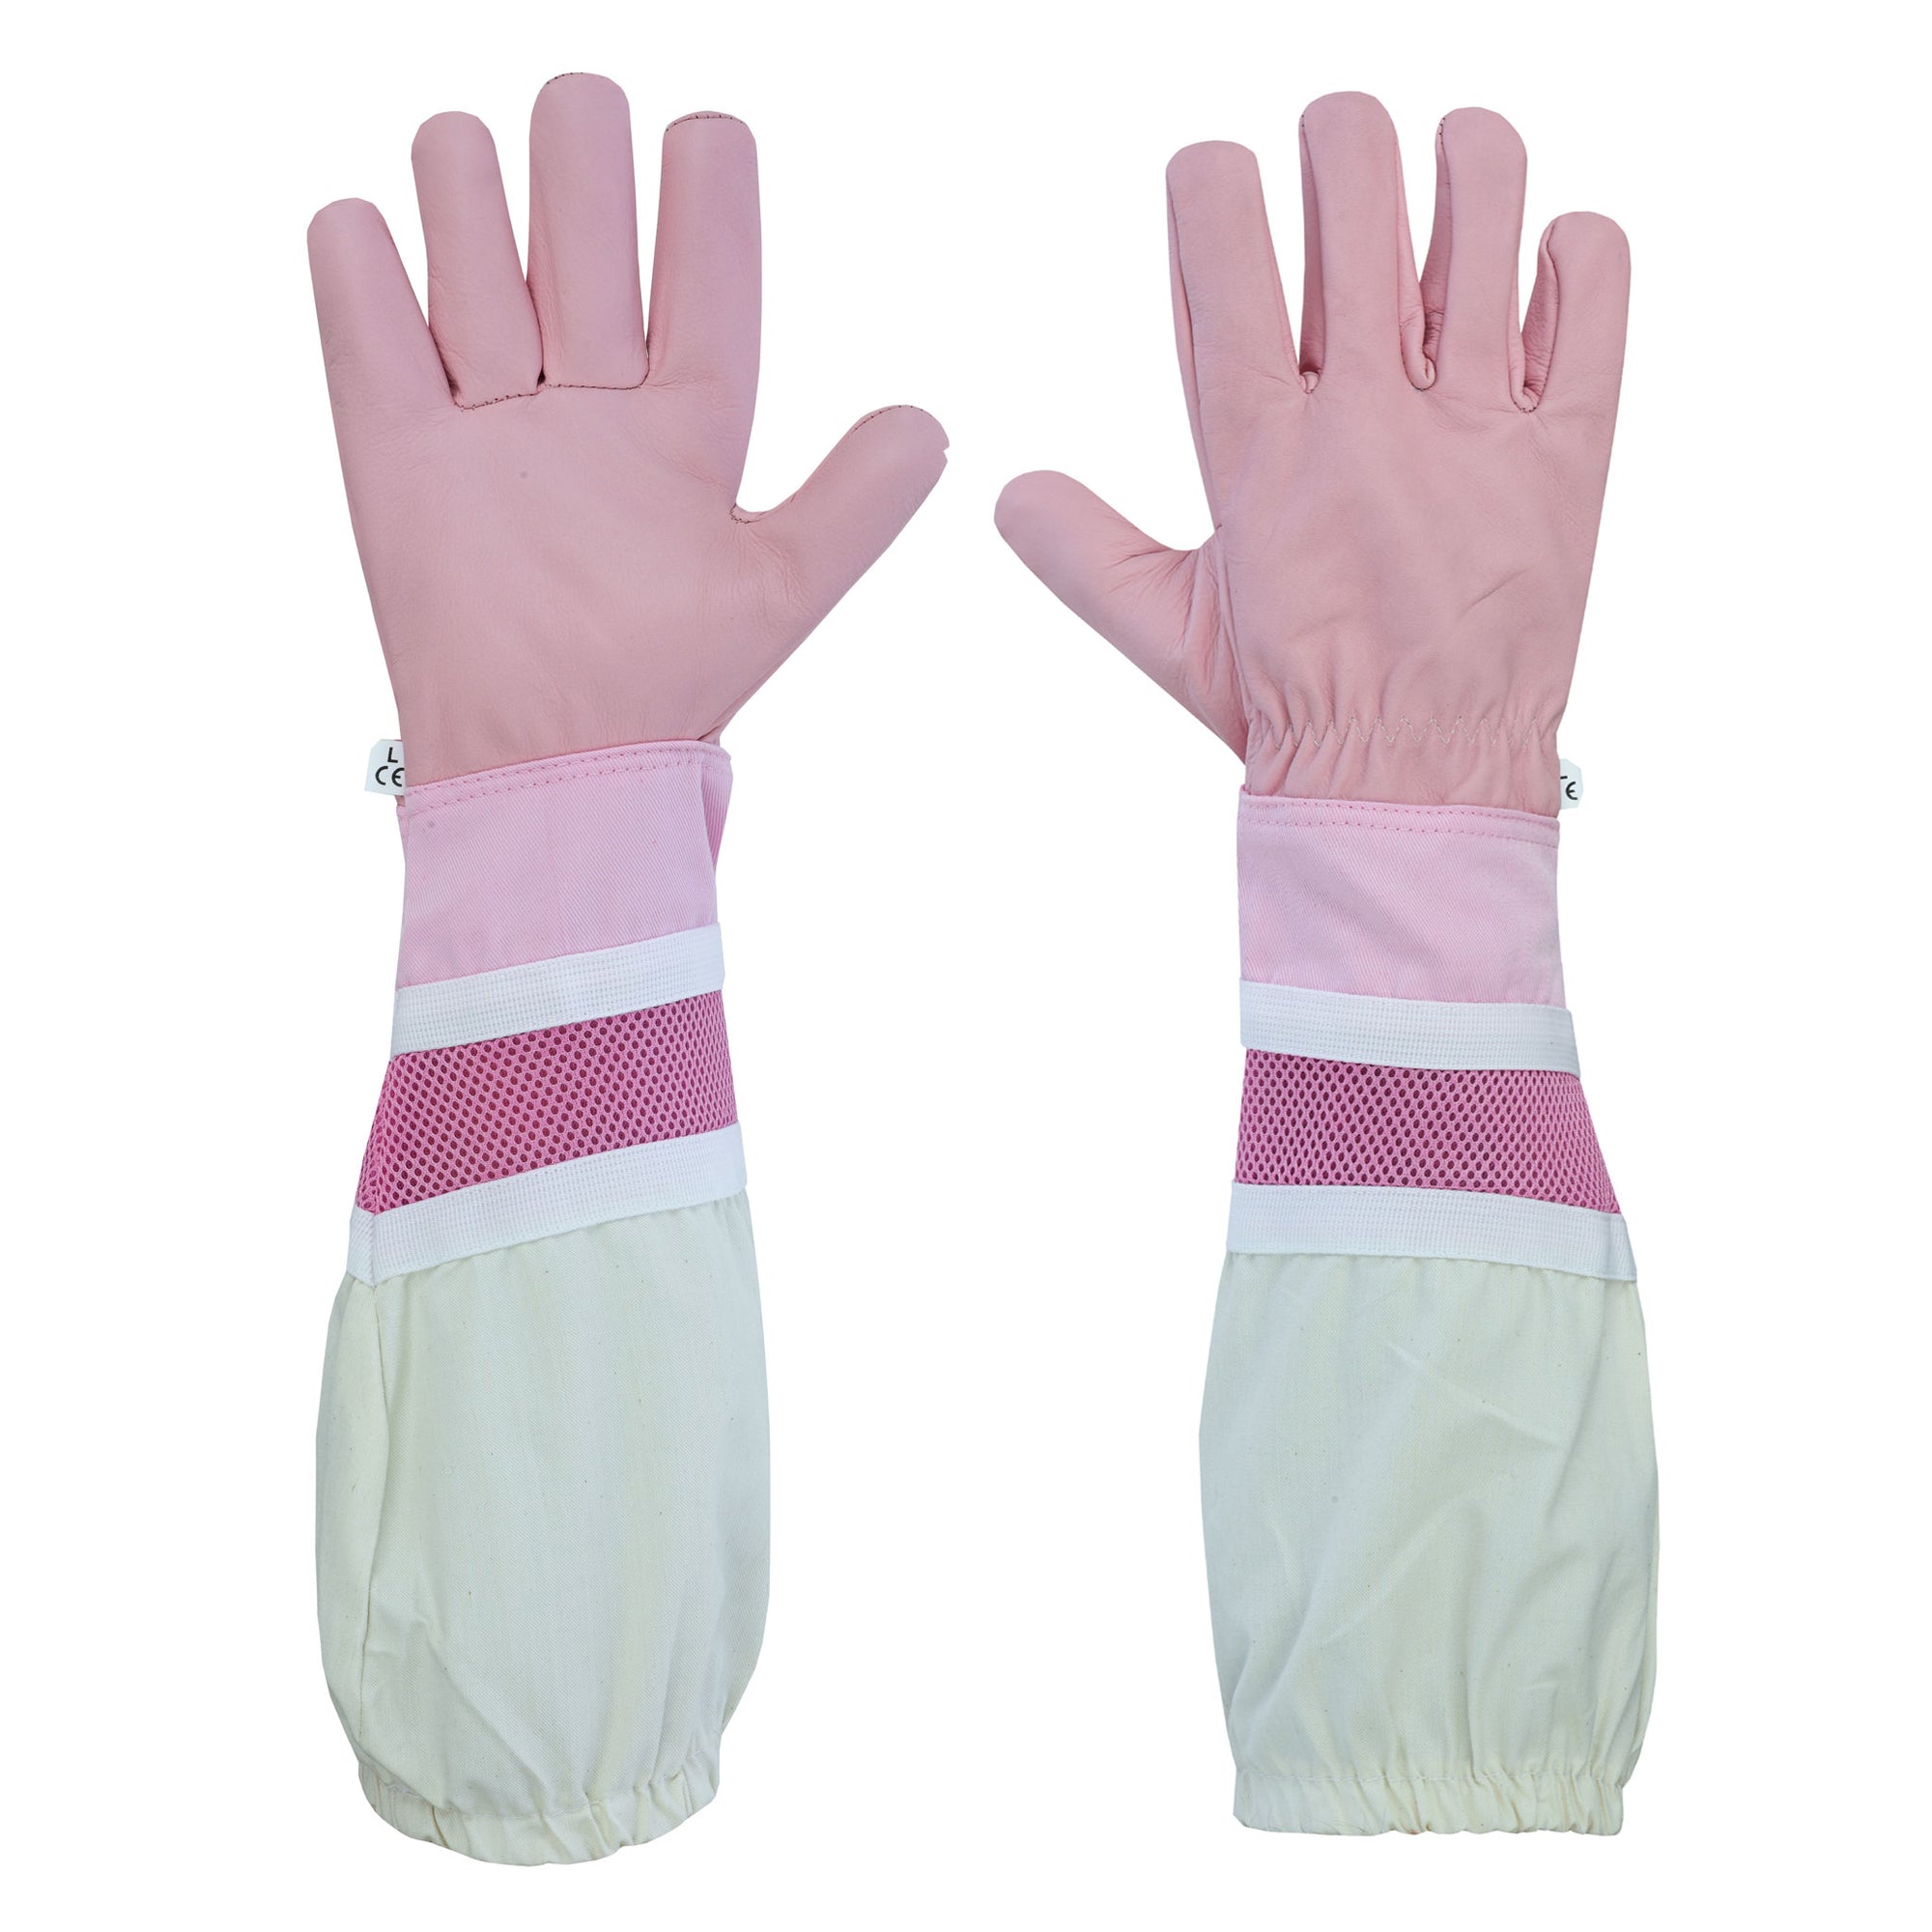 See the gloves in action – OZ ARMOUR Pink Cow Hide Ventilated Gloves providing superior protection during use.